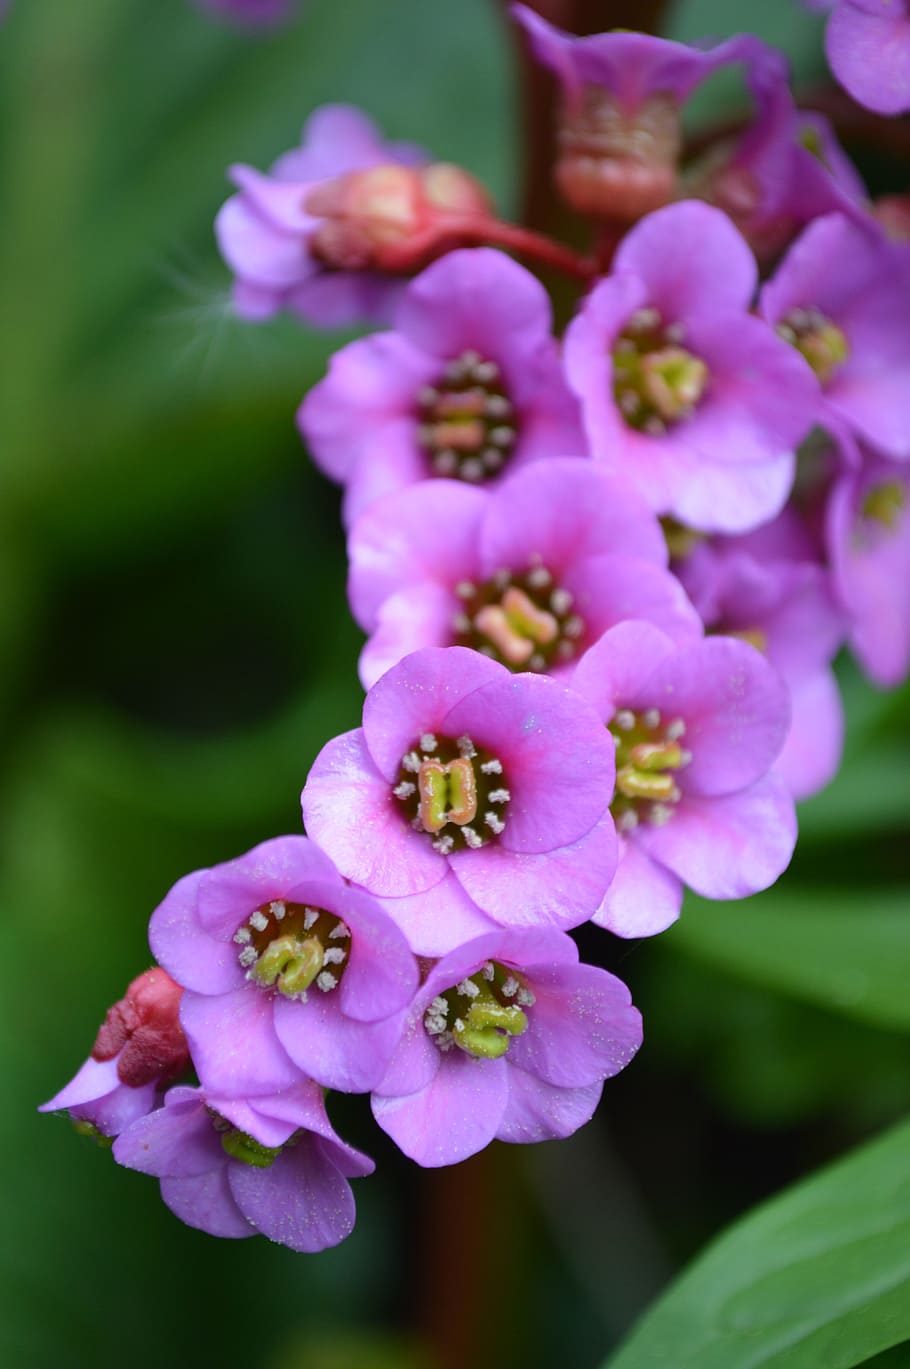 bergenia, settled wurz, Bergenia, Settled, Wurz, settled wurz, rock crushing plant, herb, pink, purple, color